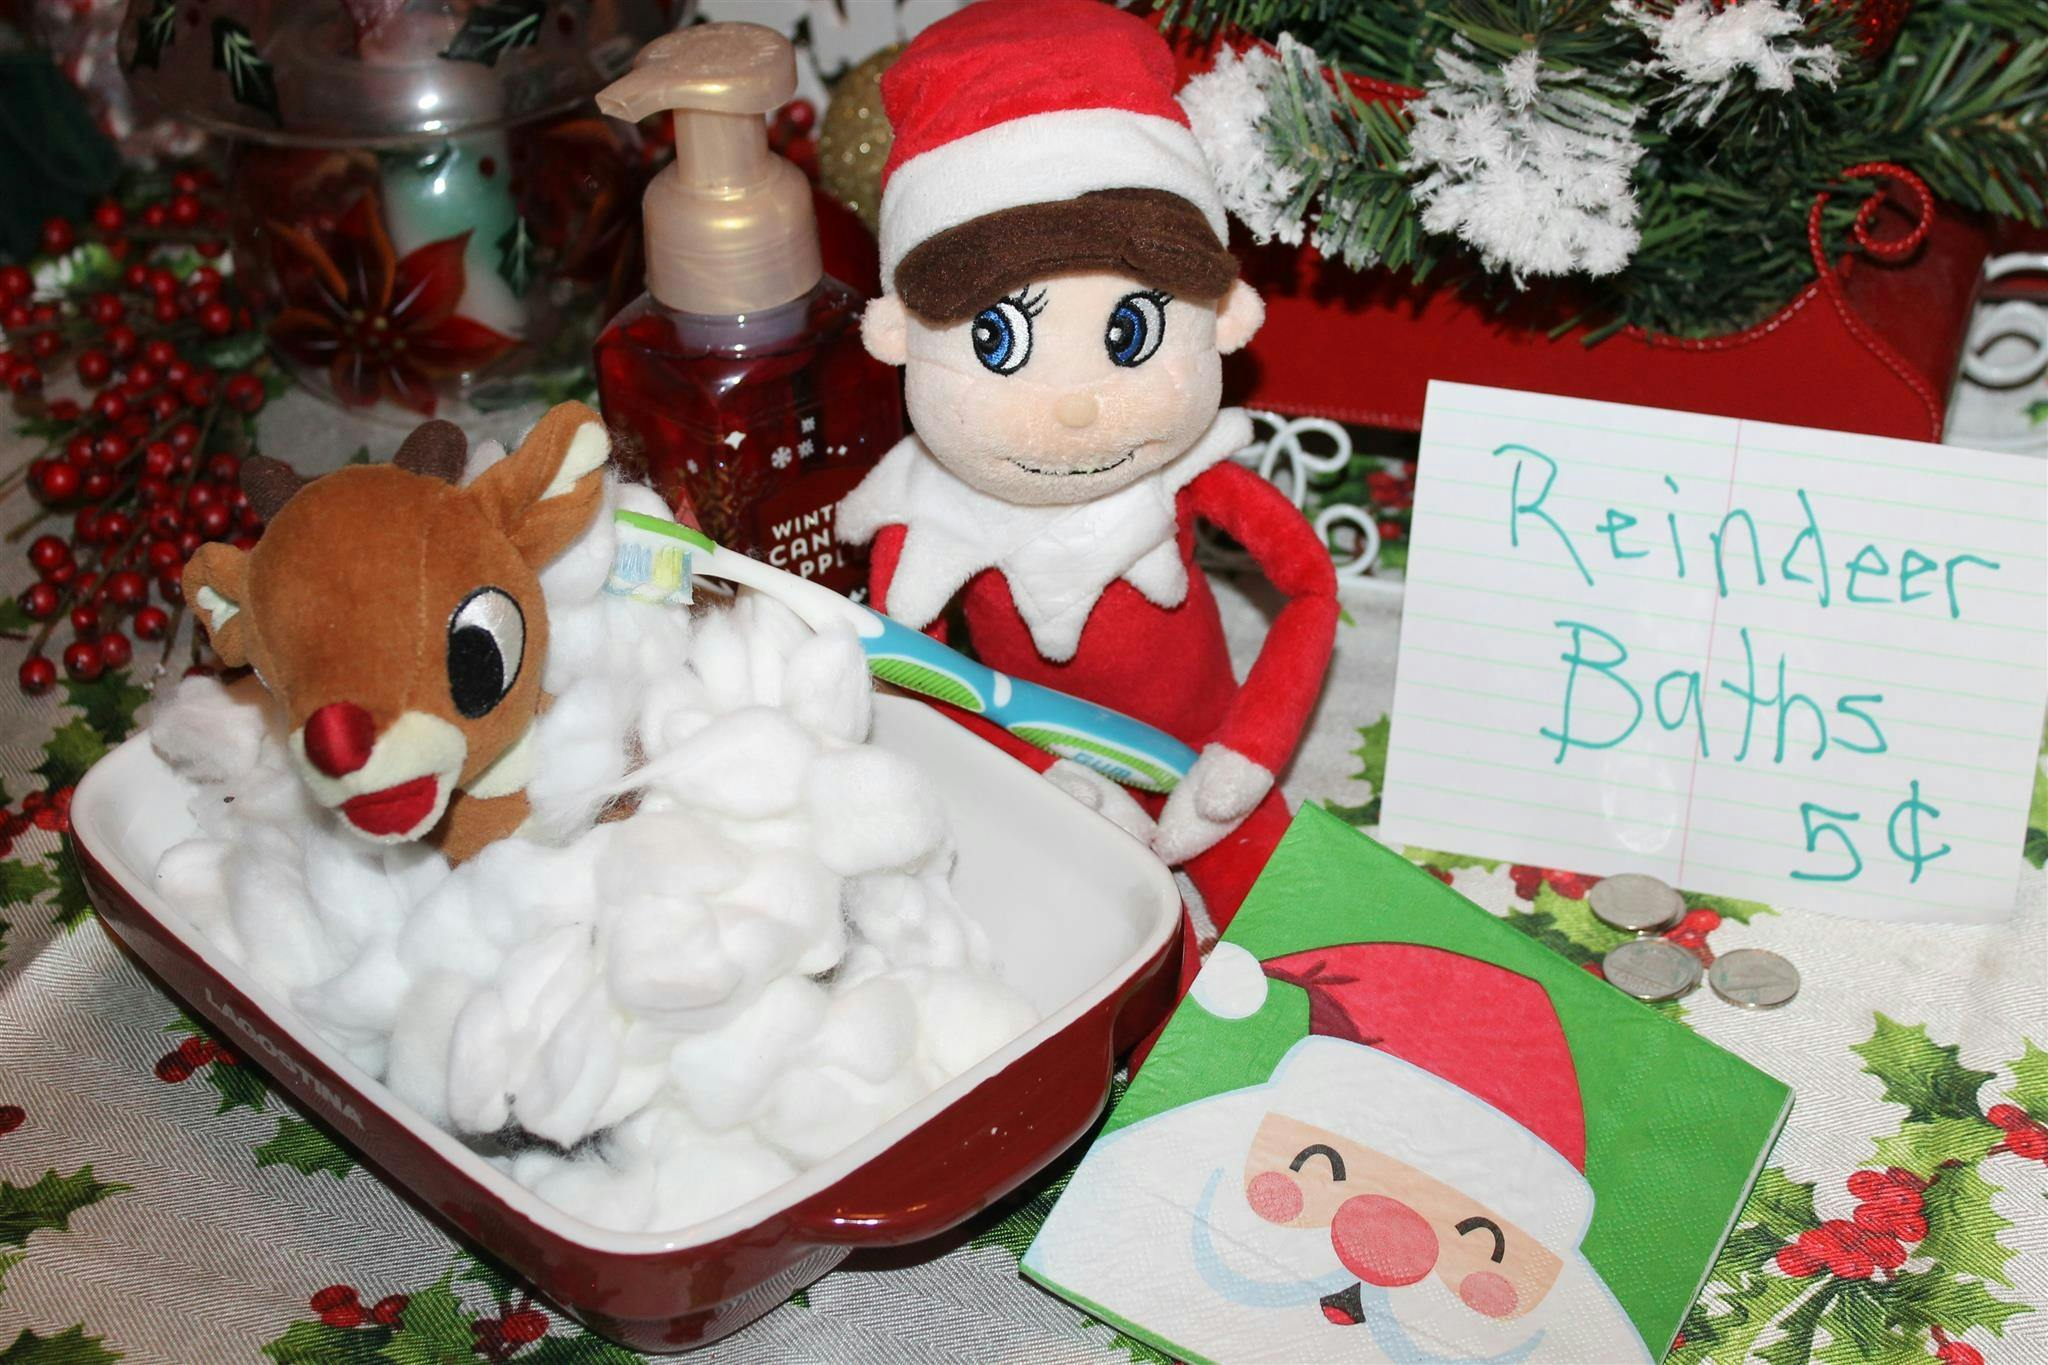 Is the Elf on the Shelf ready to create more hijinks in your home